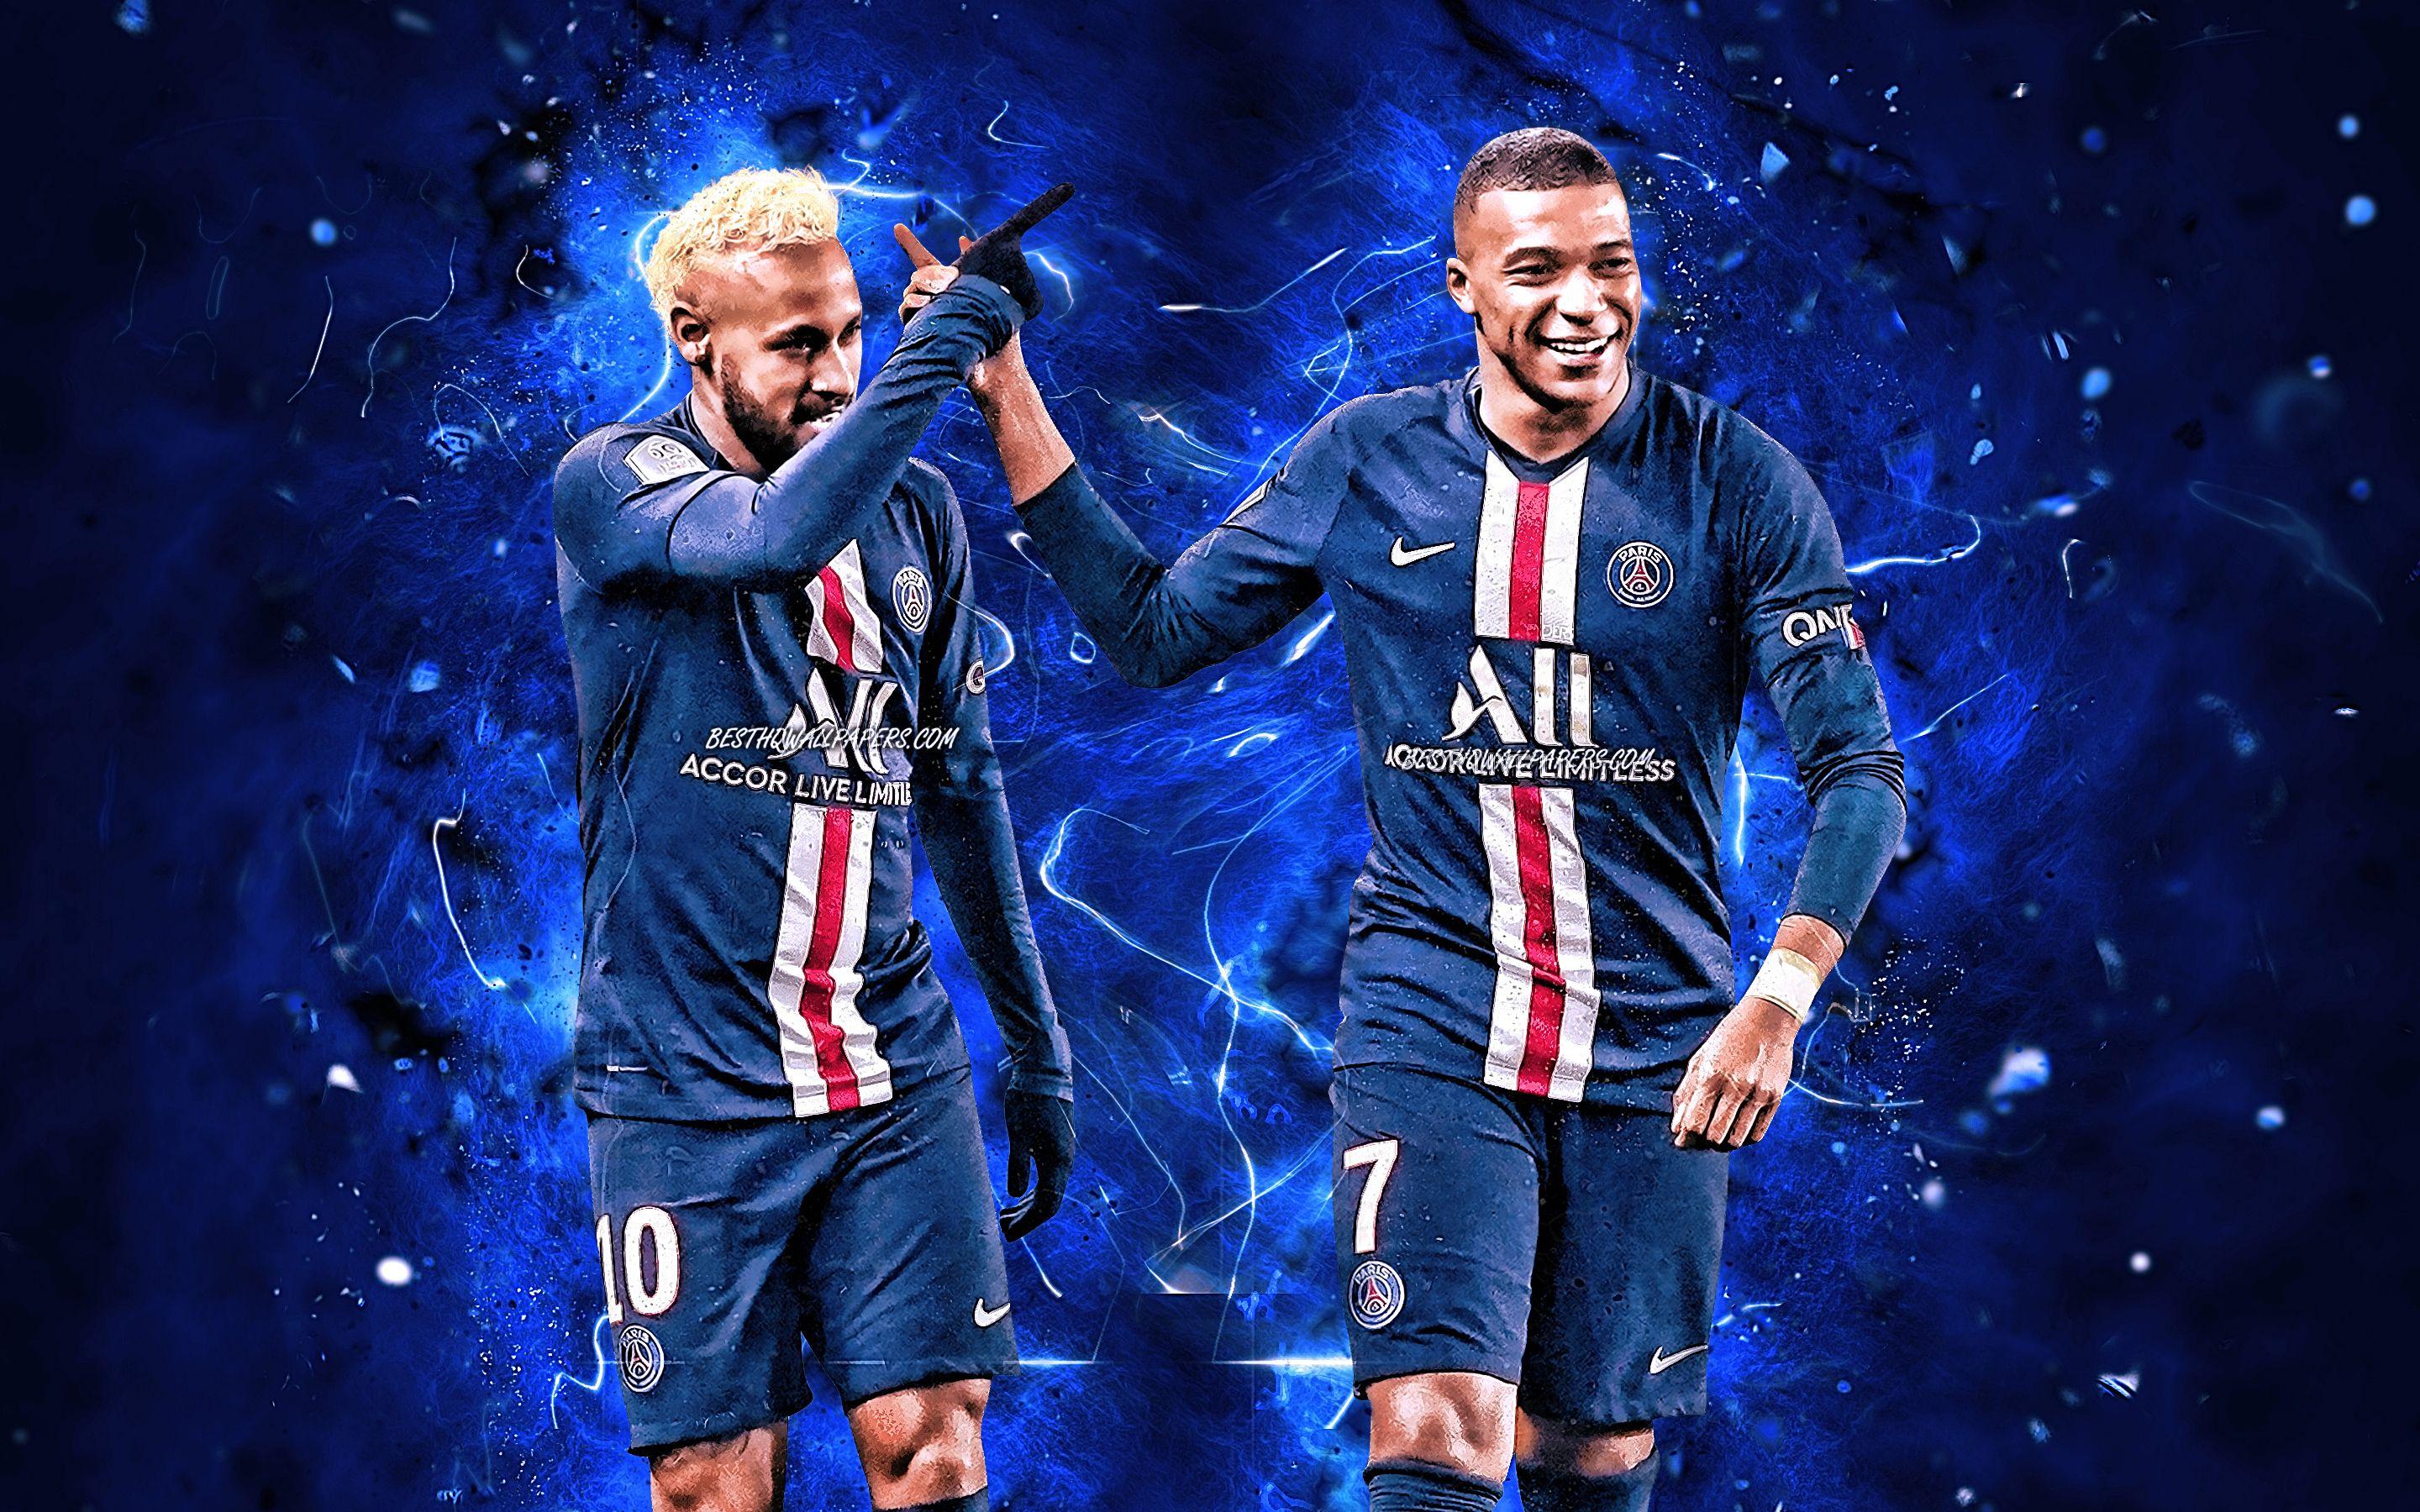 Neymar and Mbappe Wallpapers - Top Free Neymar and Mbappe Backgrounds